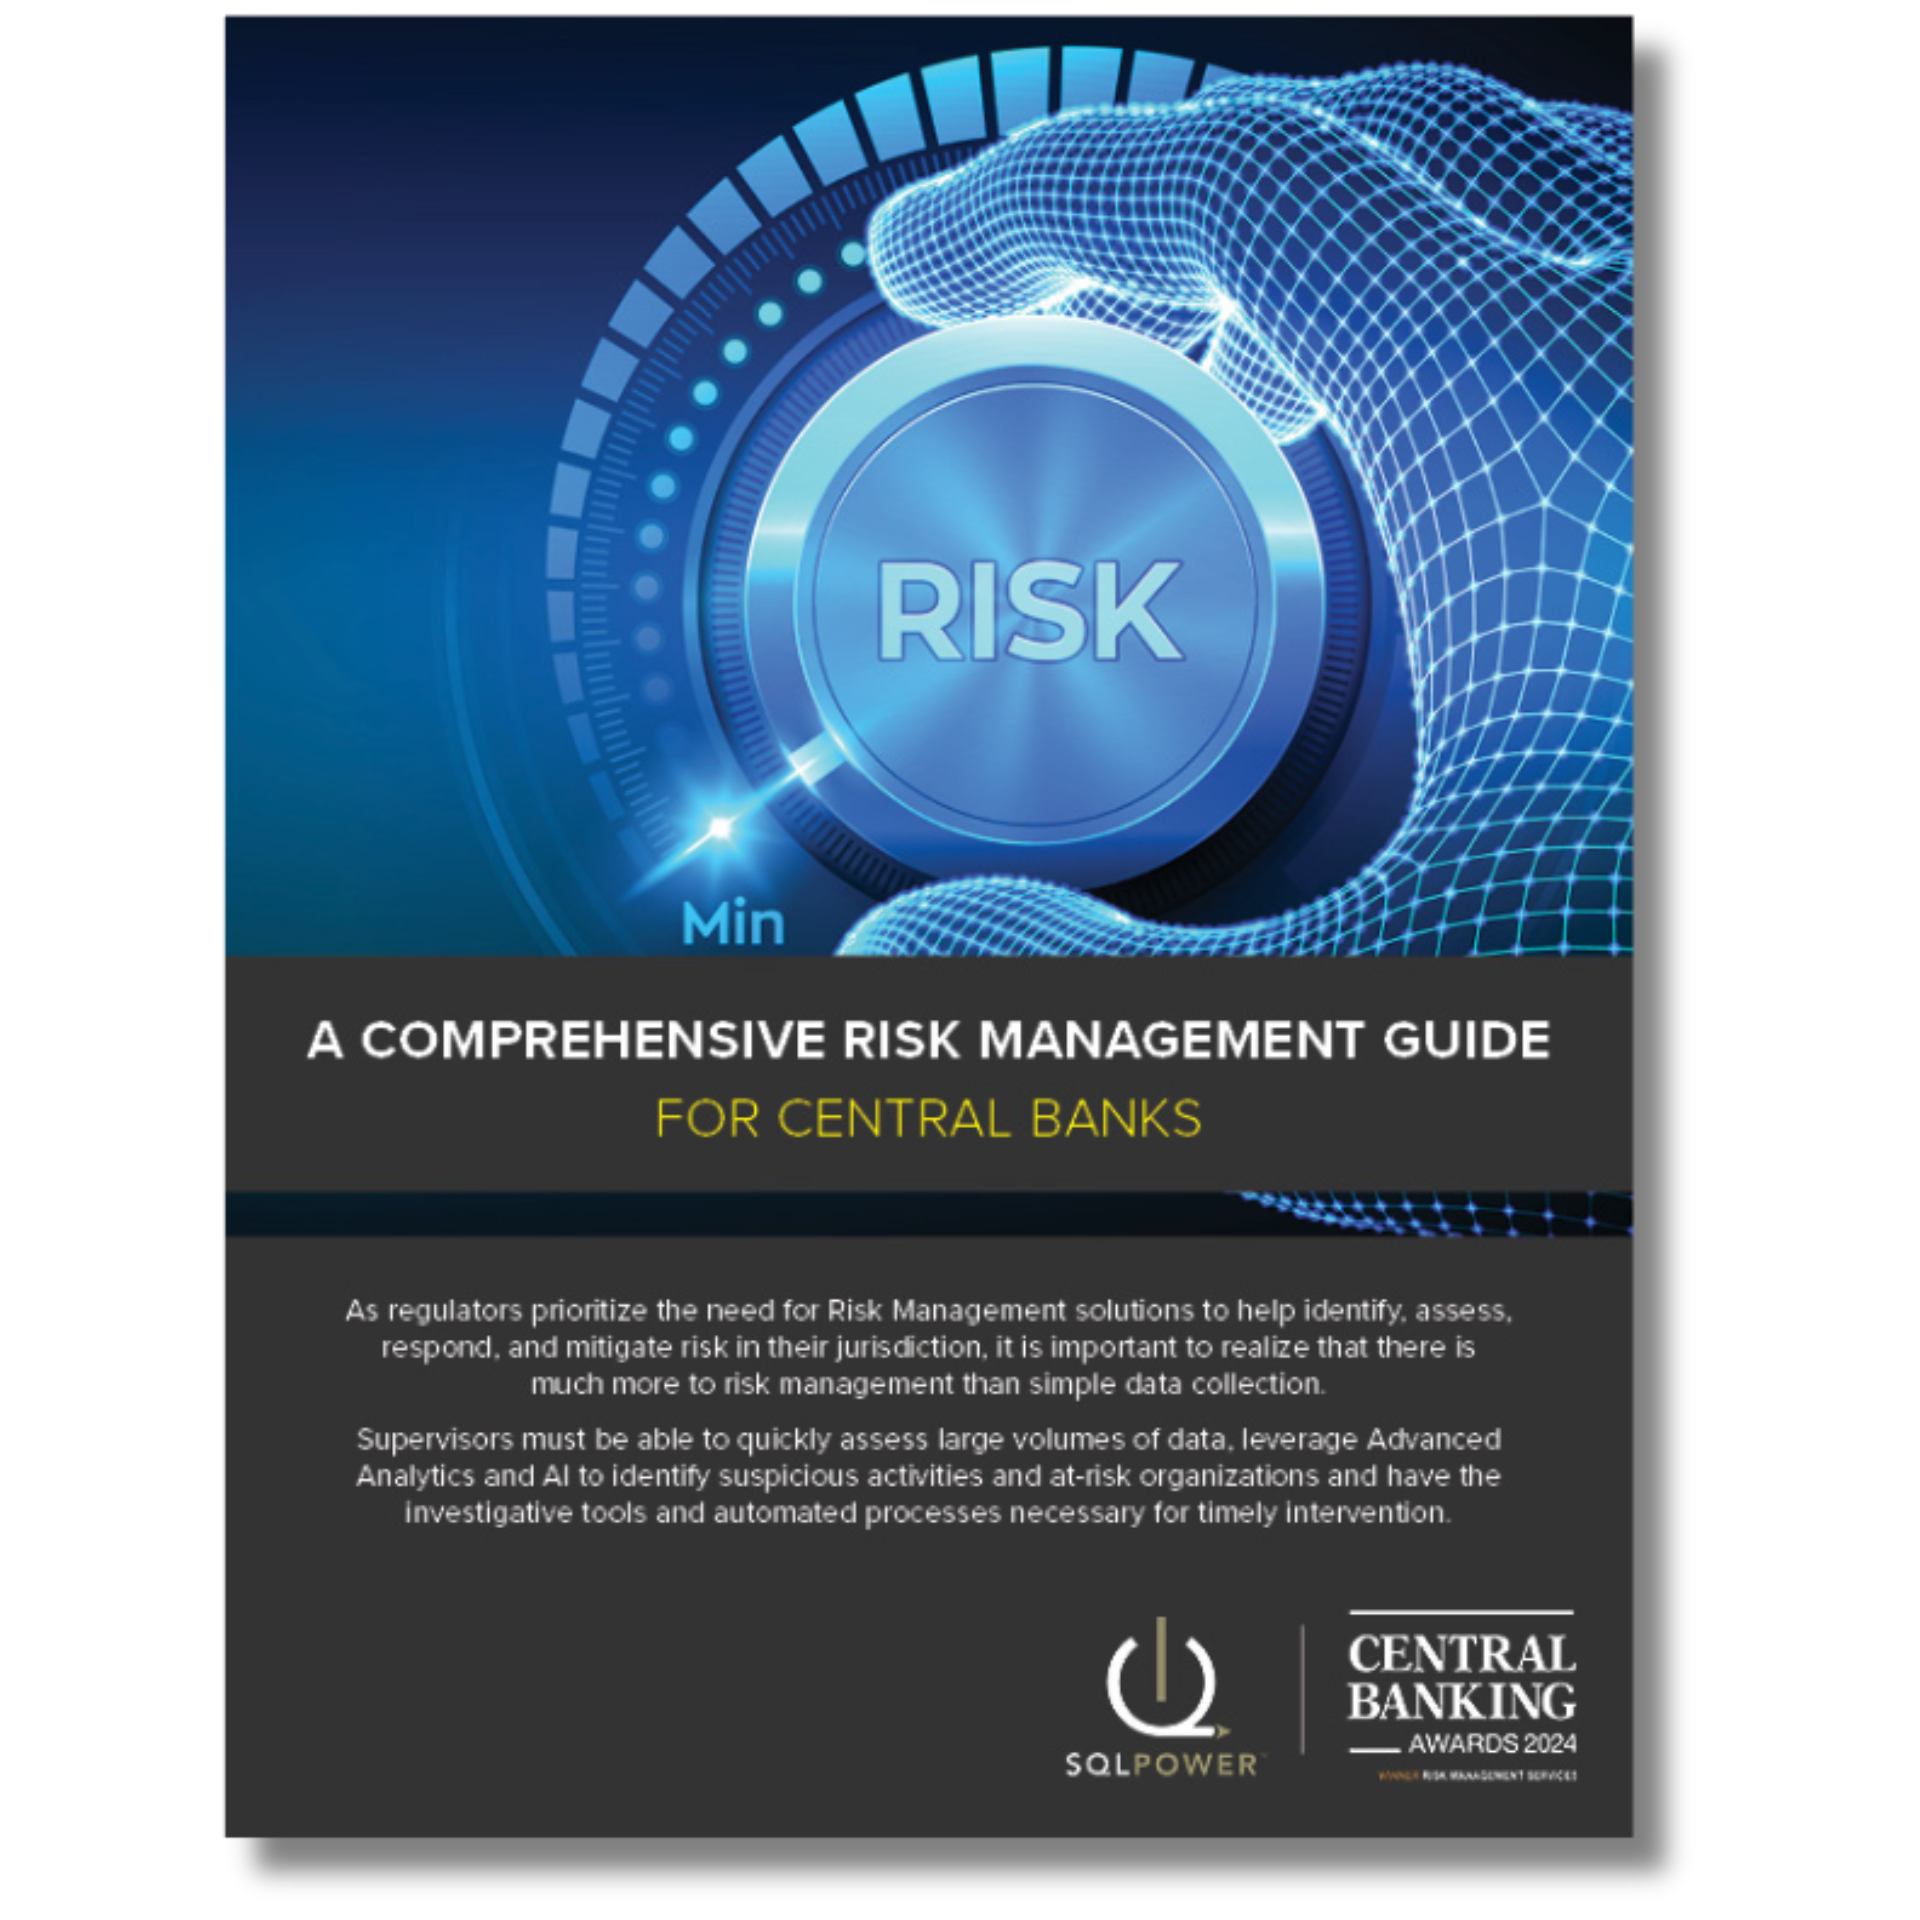 An image of the Risk Management Guide for Central Banks